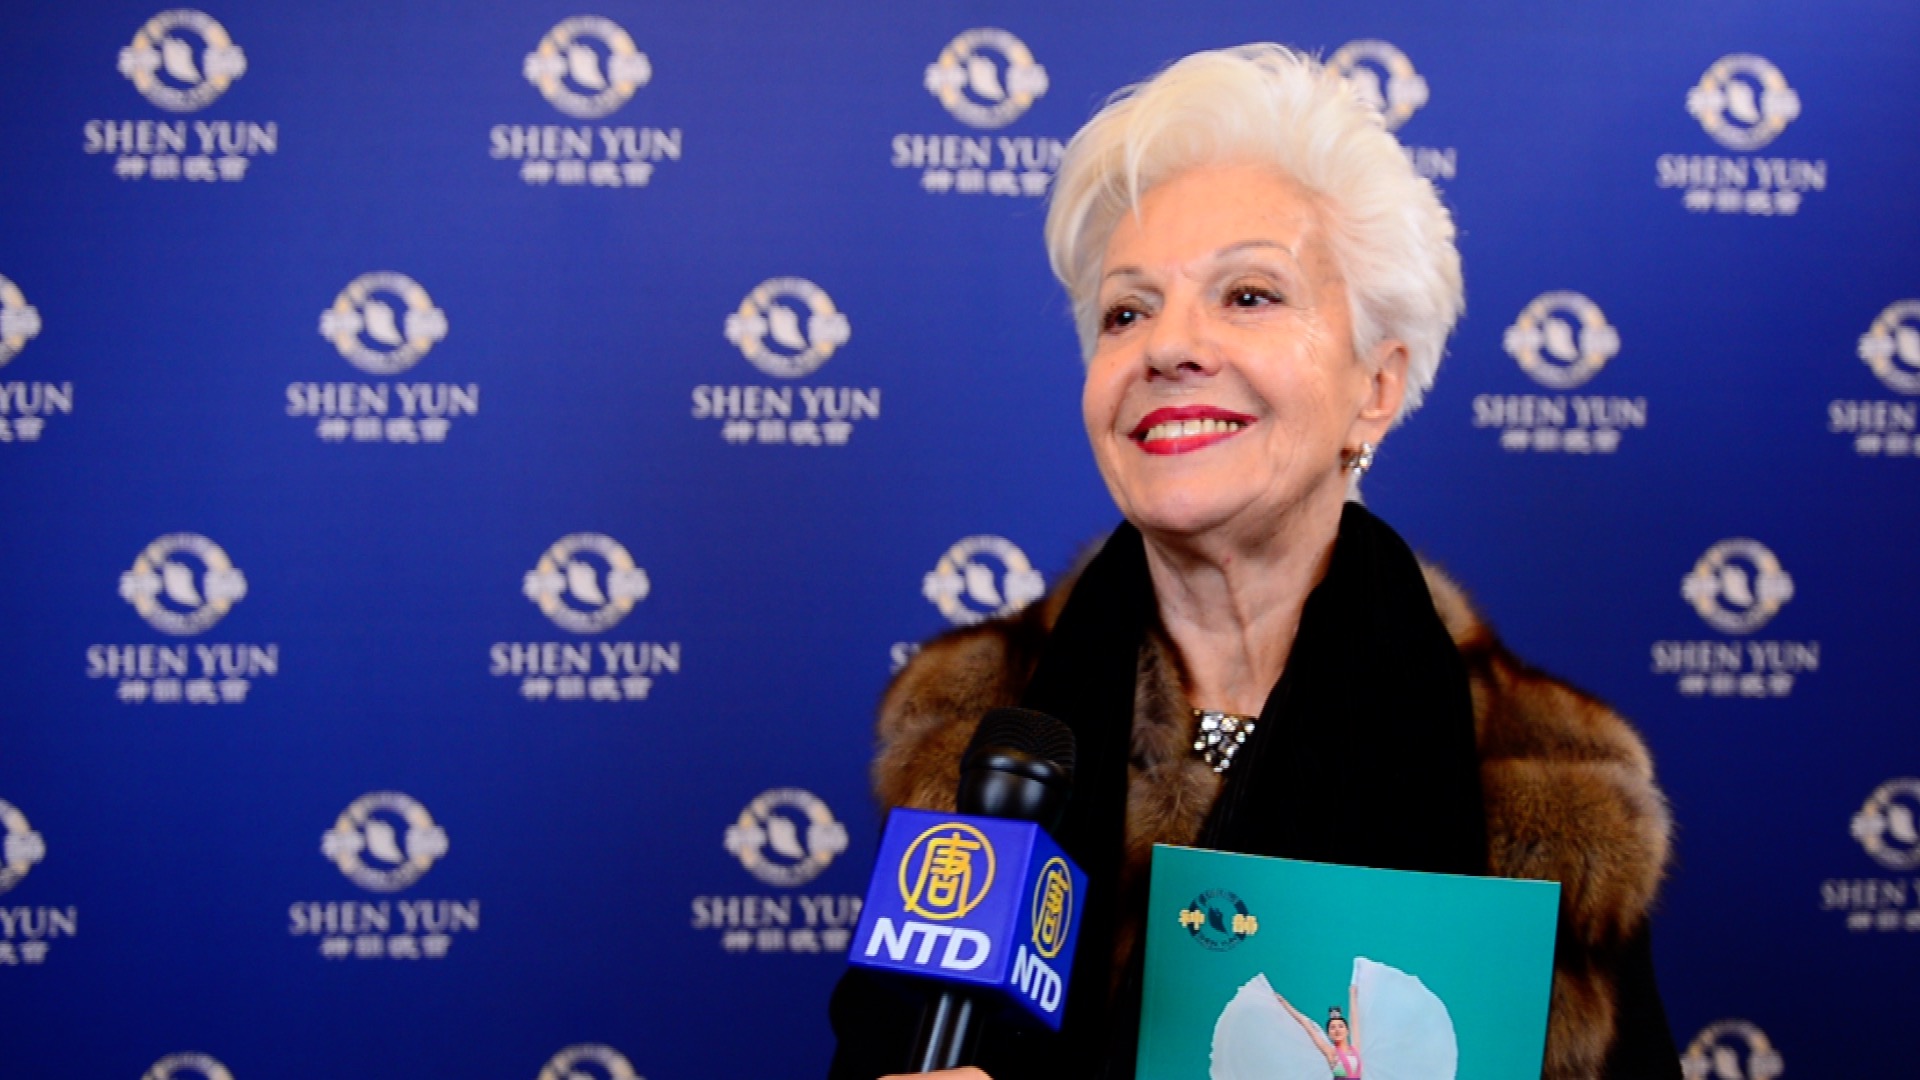 Shen Yun a ‘Magical World of Color, Harmony, and Perfection’